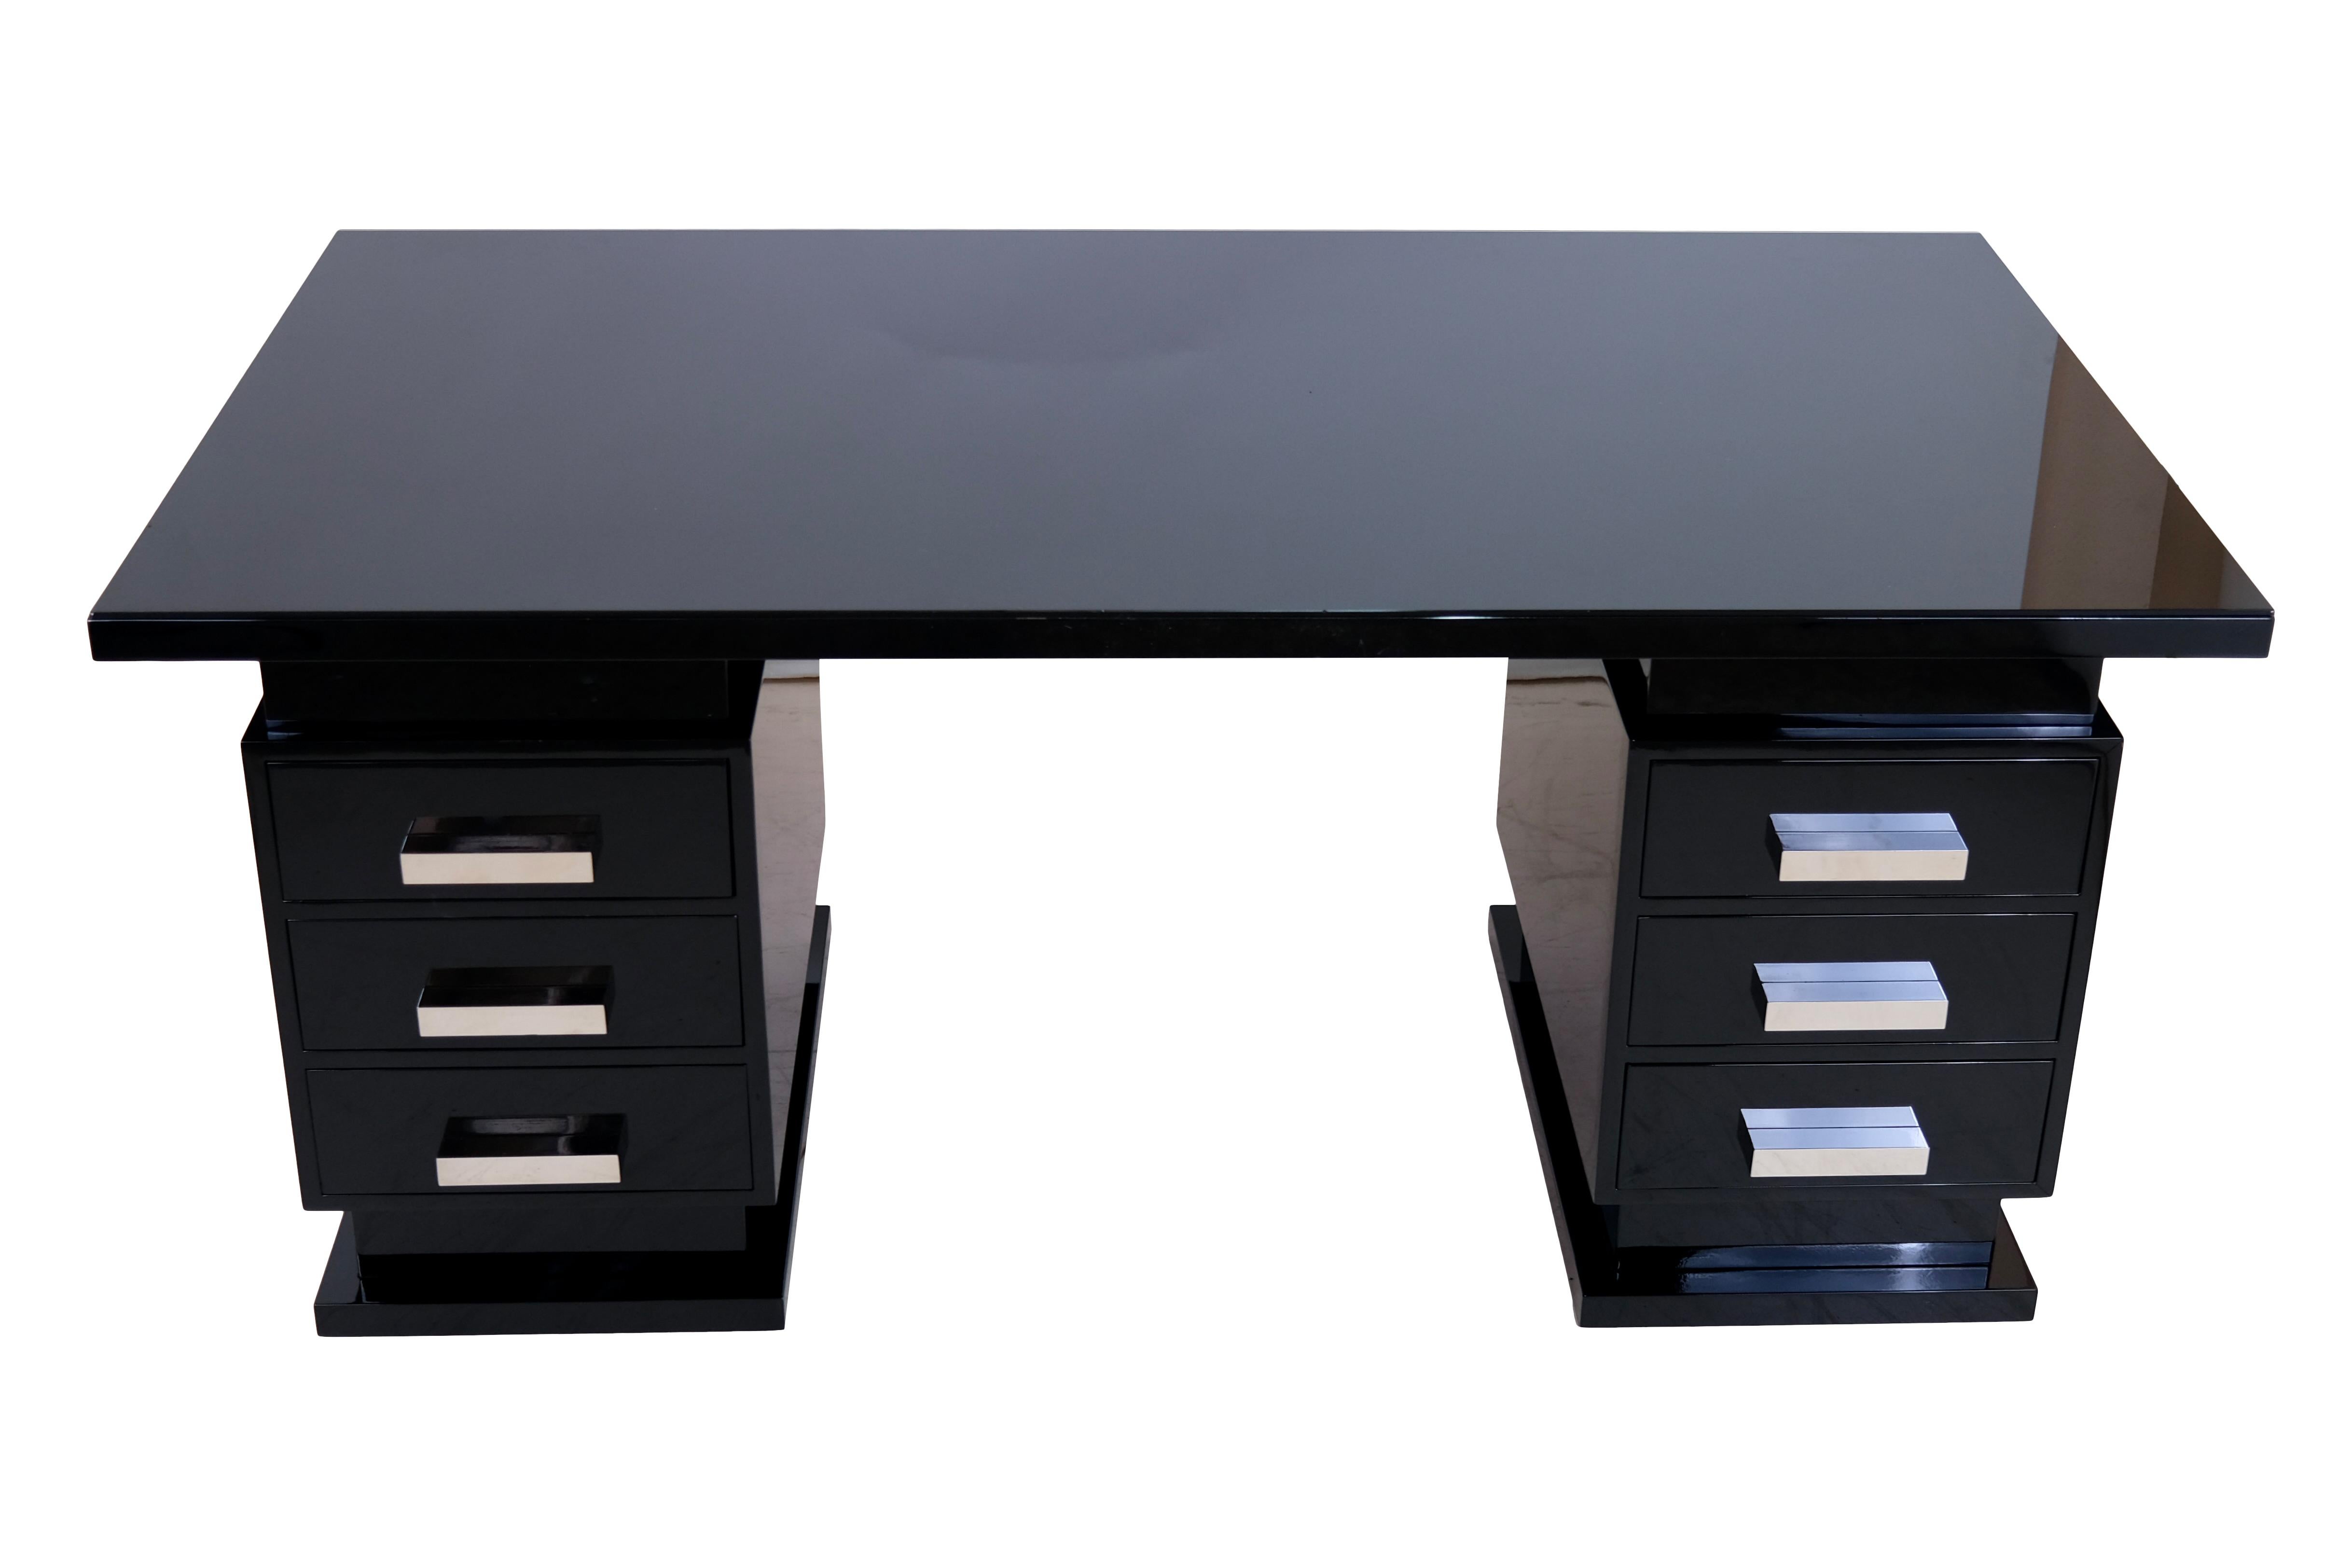 Modernist desk in black lacquer

Writing desk
Piano lacquer, high gloss black
Metal fittings

in Art Déco style, France around 1950

Dimensions:
Width: 180 cm
Height: 78 cm
Depth: 90 cm